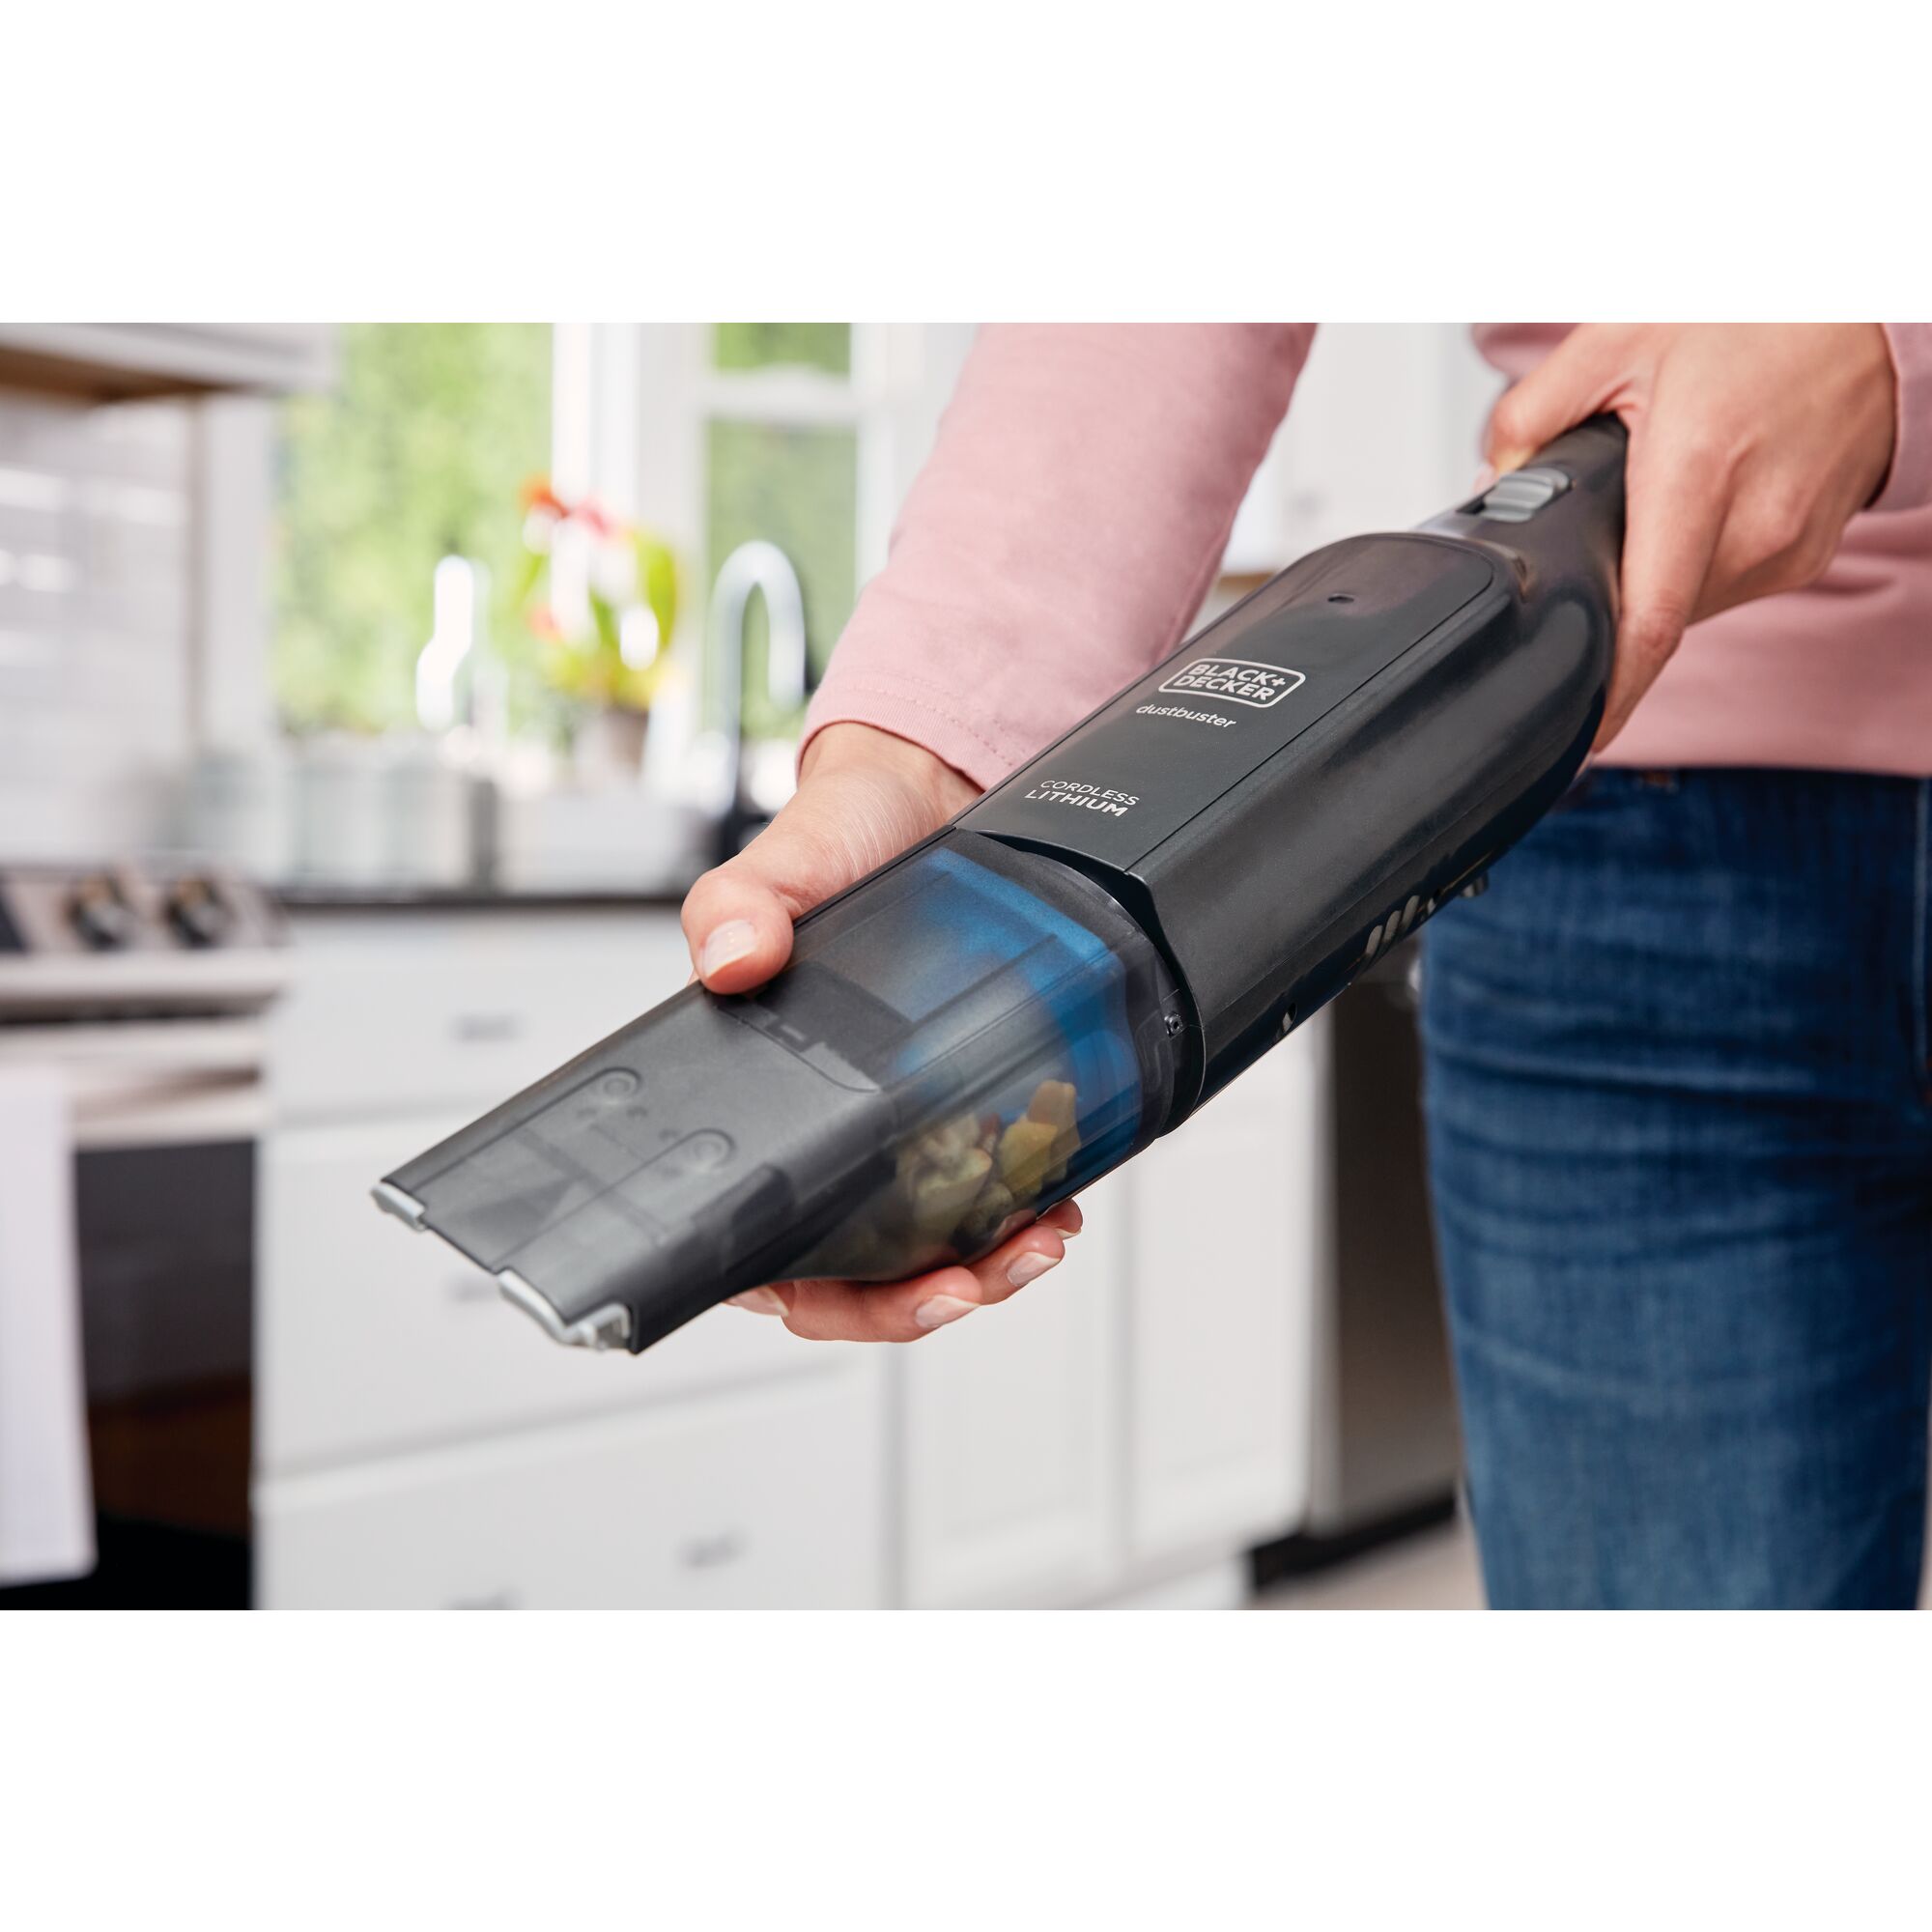 Easy to clean dustbin in a dustbuster 12 volt advanced clean cordless hand vacuum.